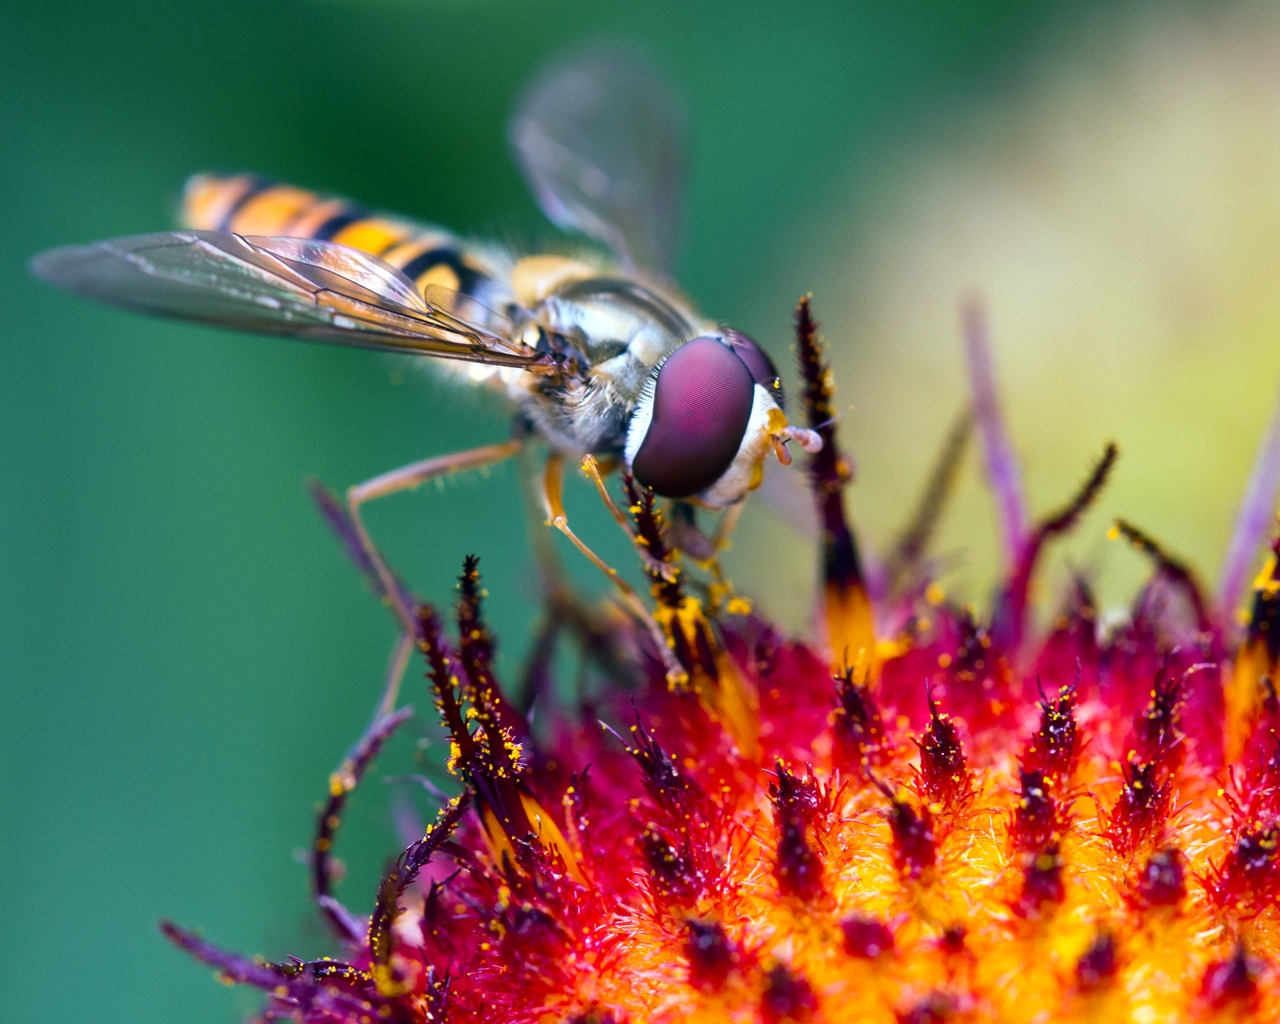 Hover Fly at Work for 1280 x 1024 resolution